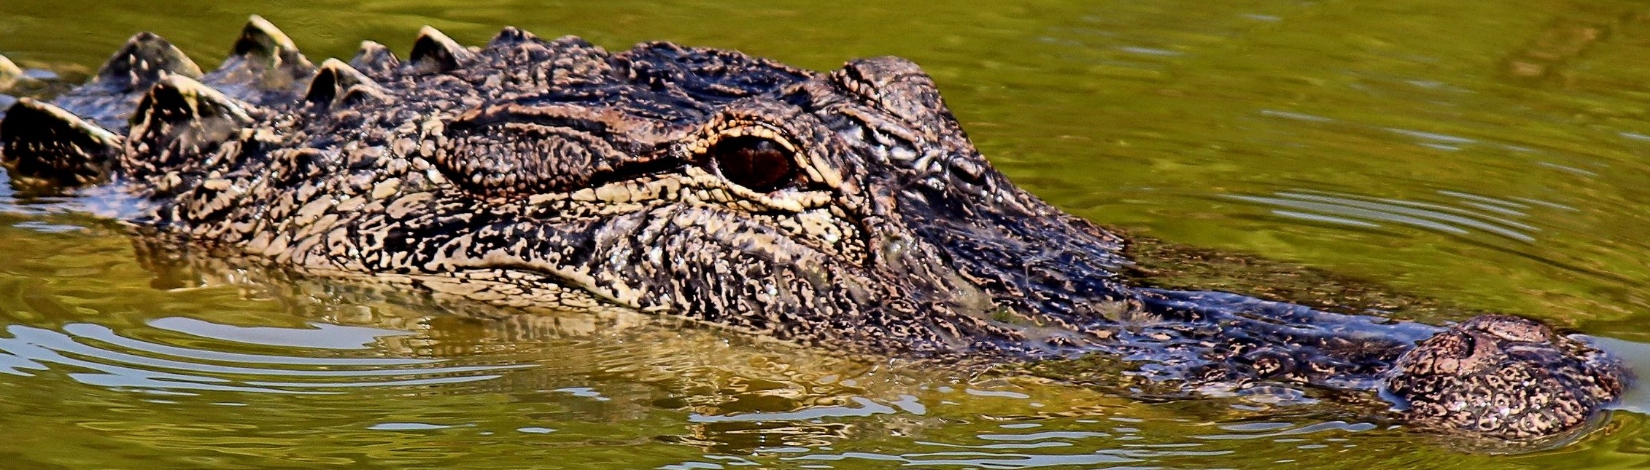 Close-up of a large alligator in a pond.    